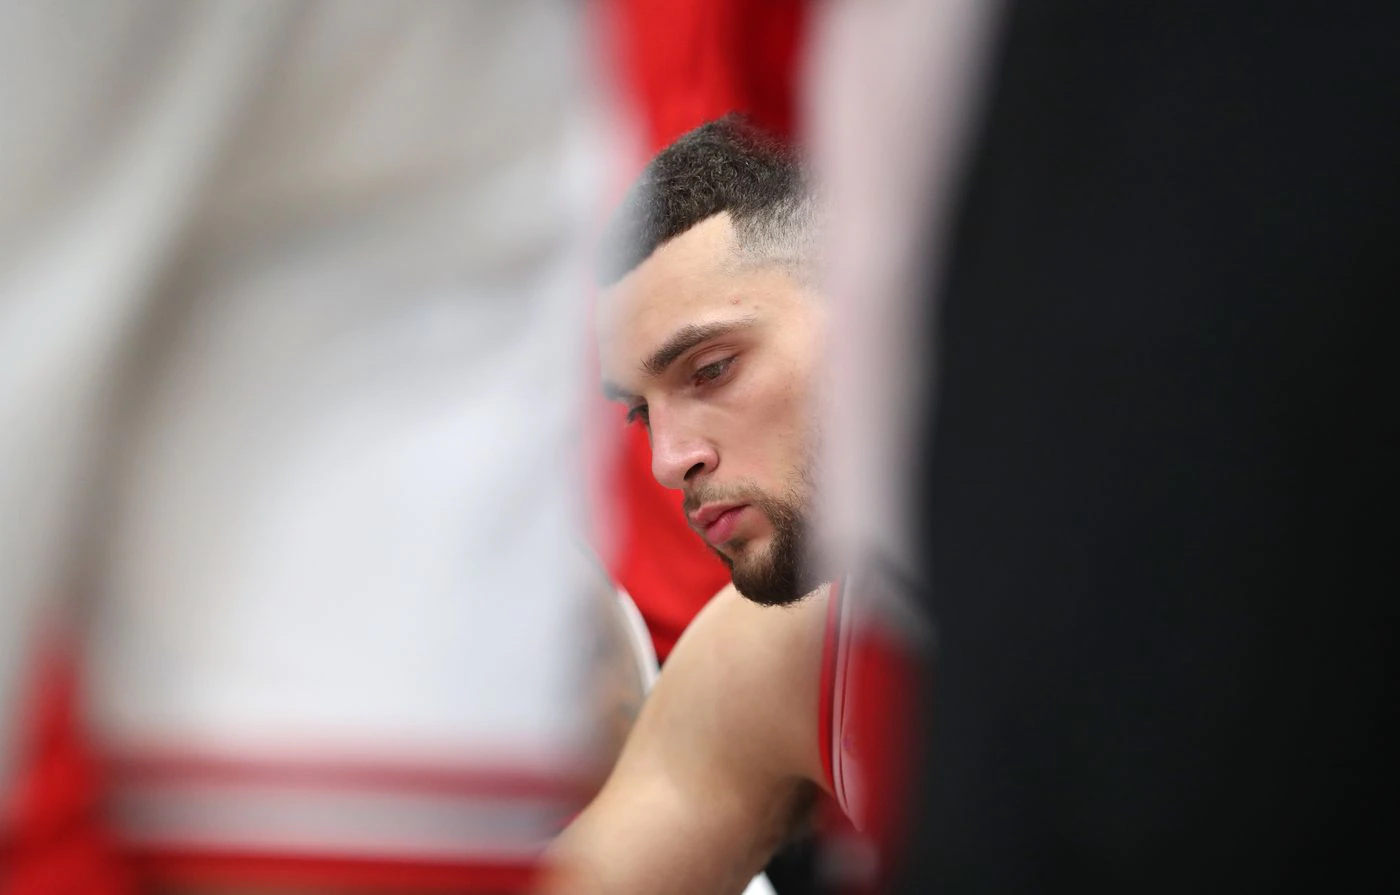 Chicago Bulls guard Zach LaVine (8) sits on the bench during a timeout in the third quarter against the Washington Wizards at United Center on Jan. 7, 2022, in Chicago.